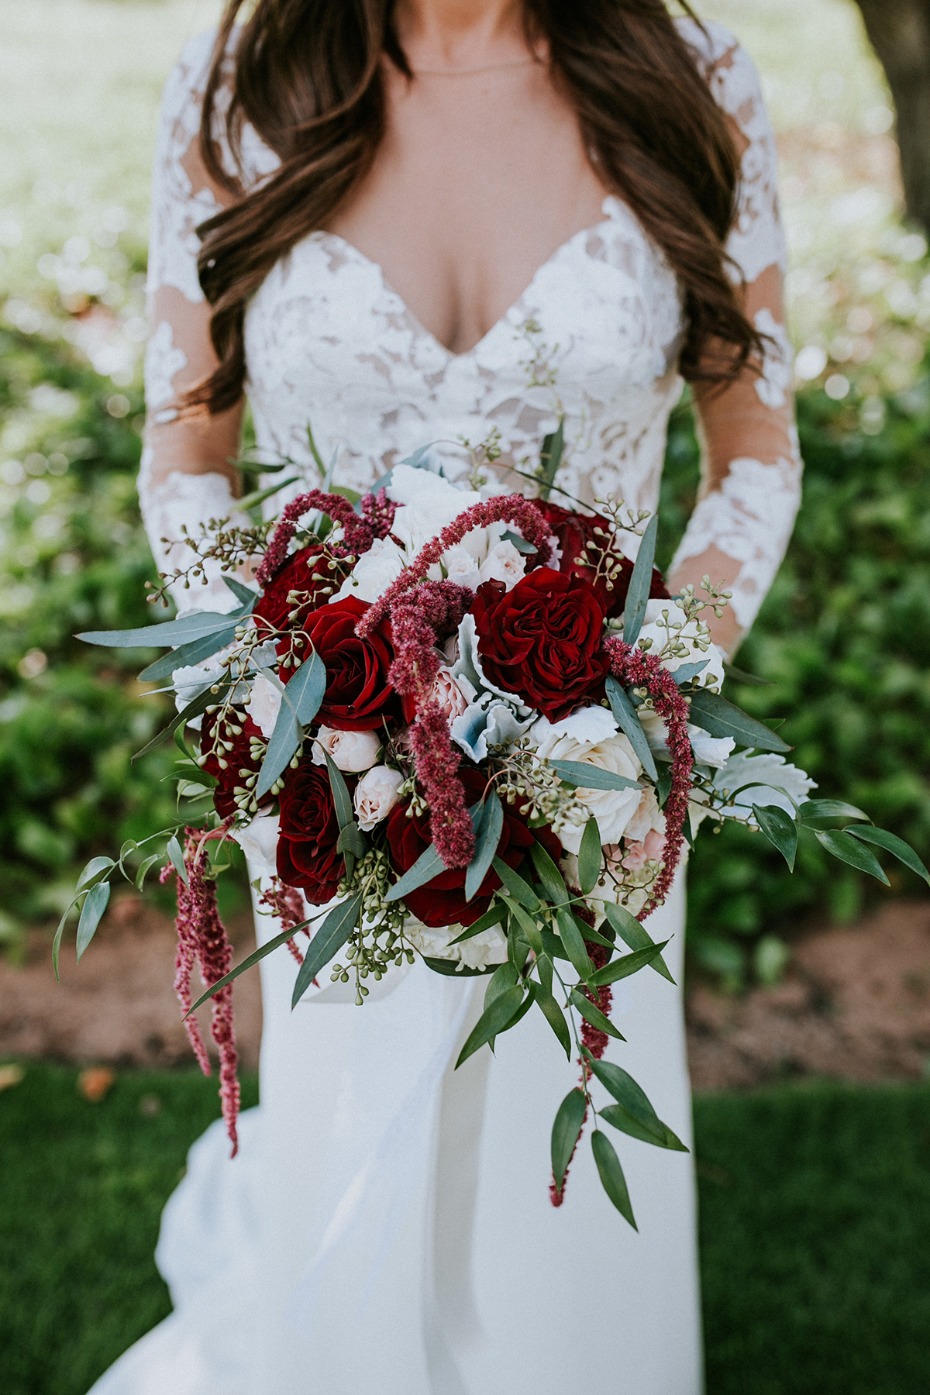 Pops of red bouquet